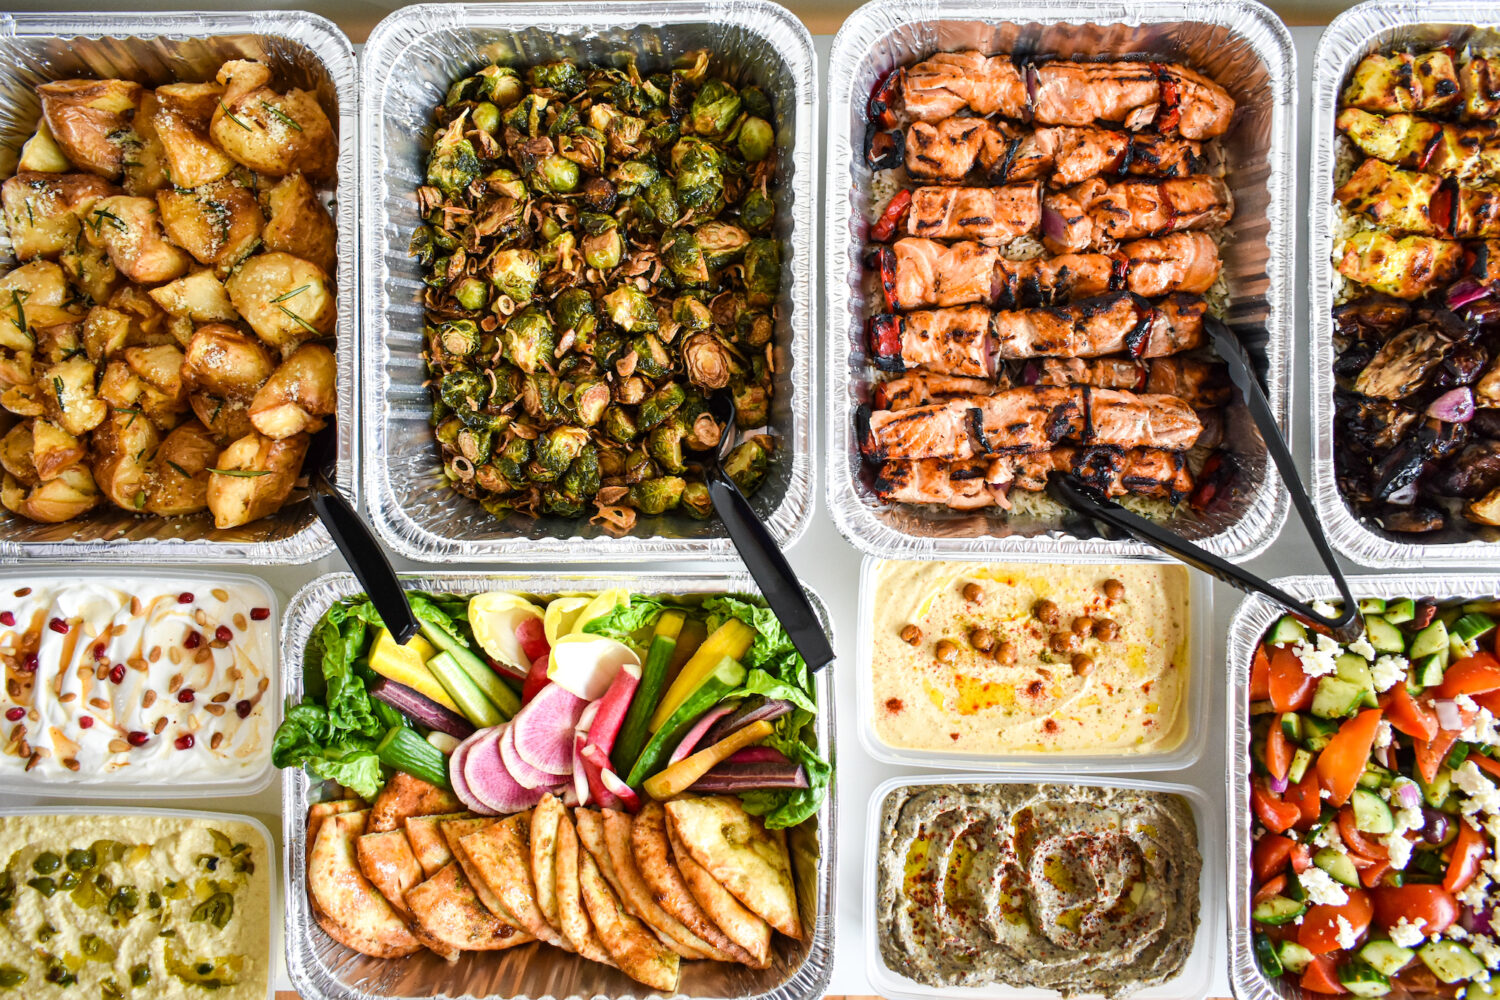 Chicago Box Lunch Catering